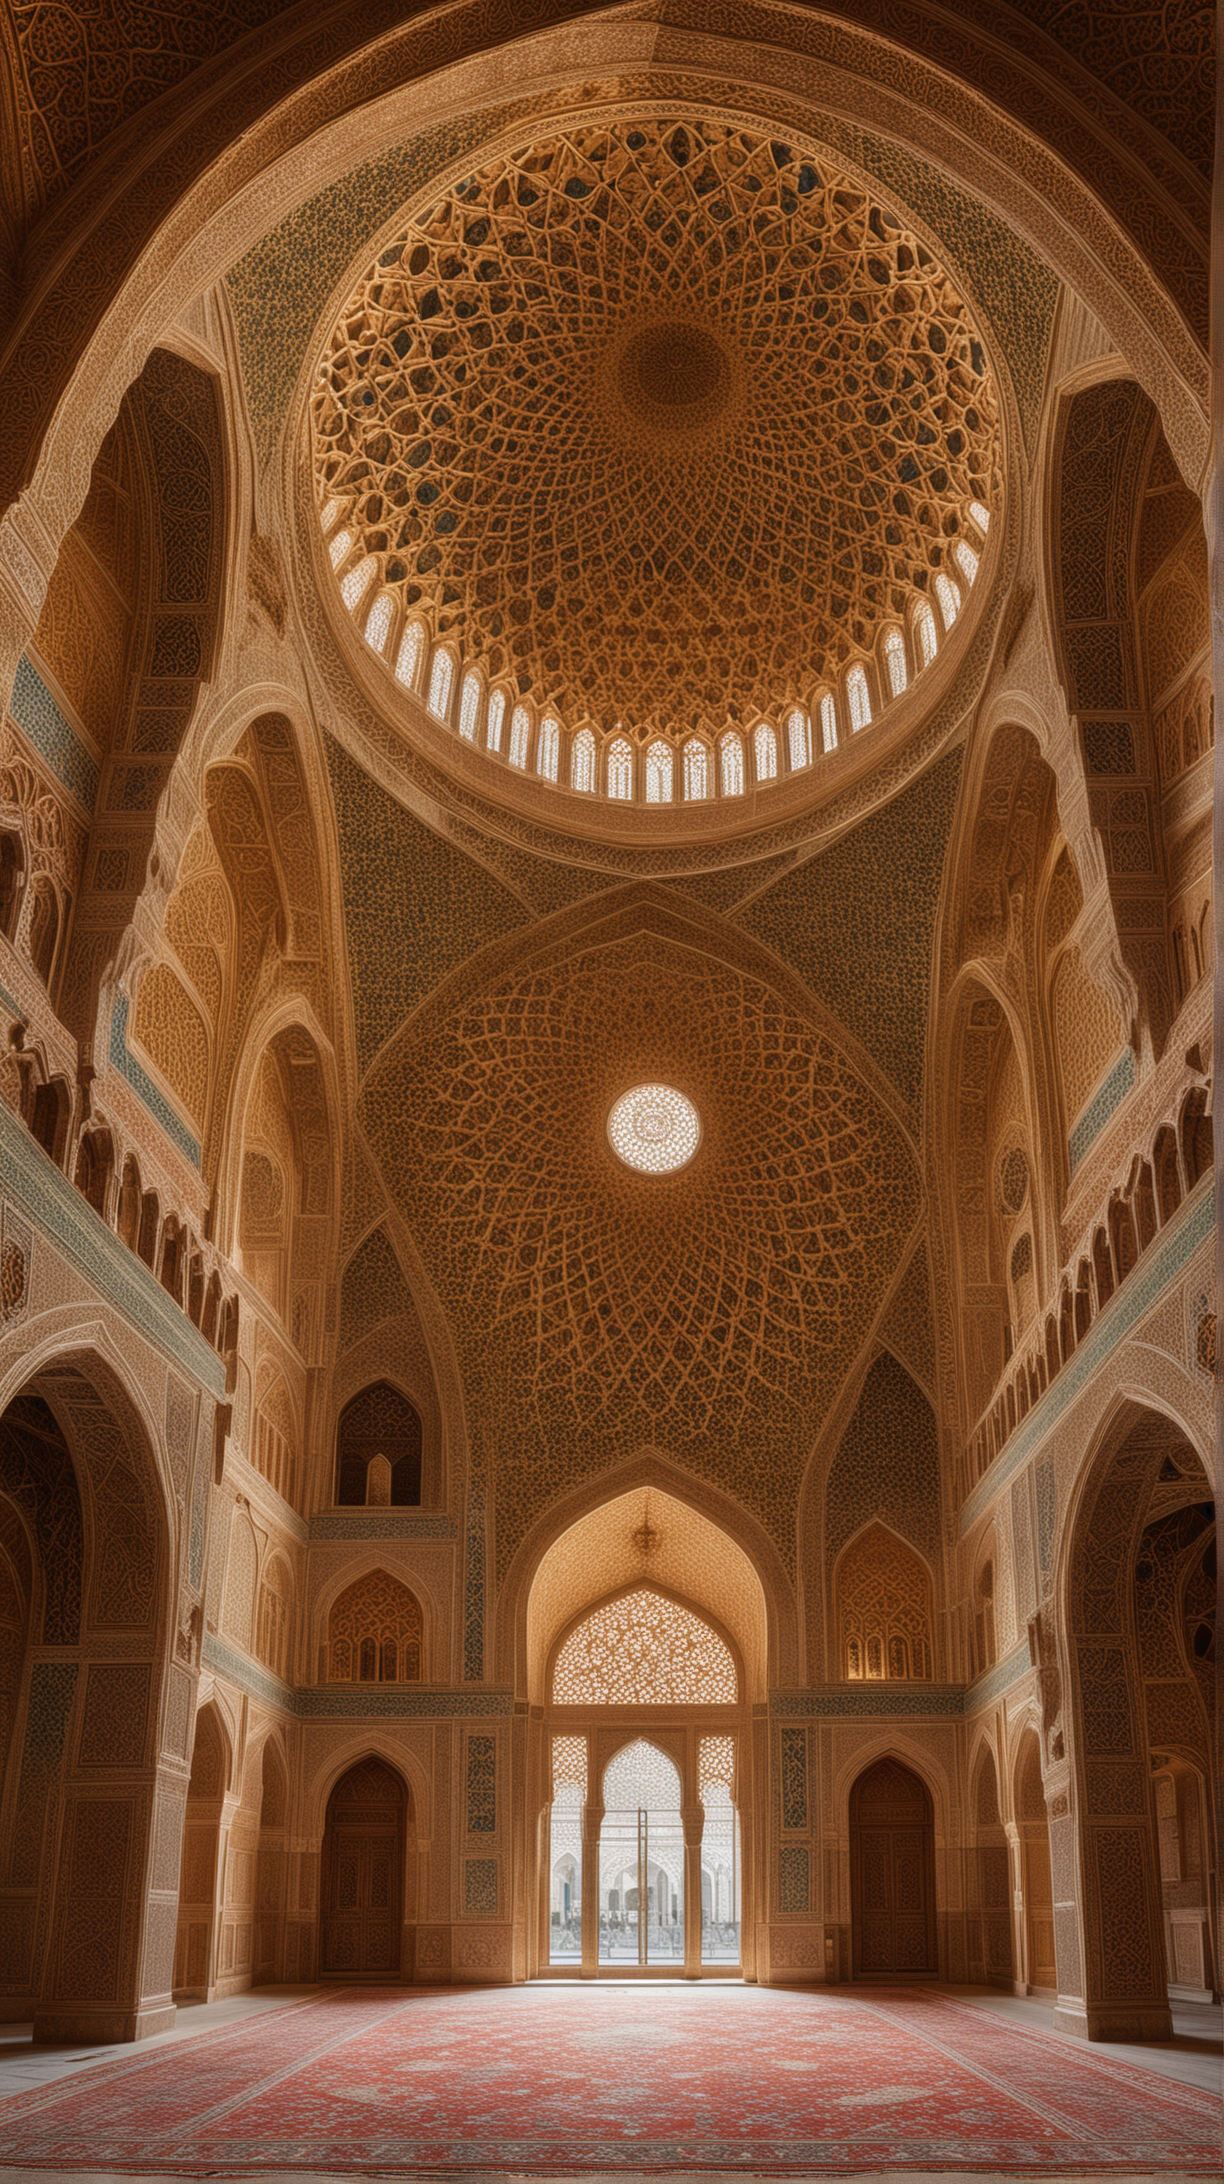  A breathtaking panorama showcasing the intricate geometric patterns, arabesques, and ornate motifs adorning the walls, ceilings, and domes of historic mosques and palaces, exemplifying the fusion of art and spirituality in Islamic culture.Hyper realistic